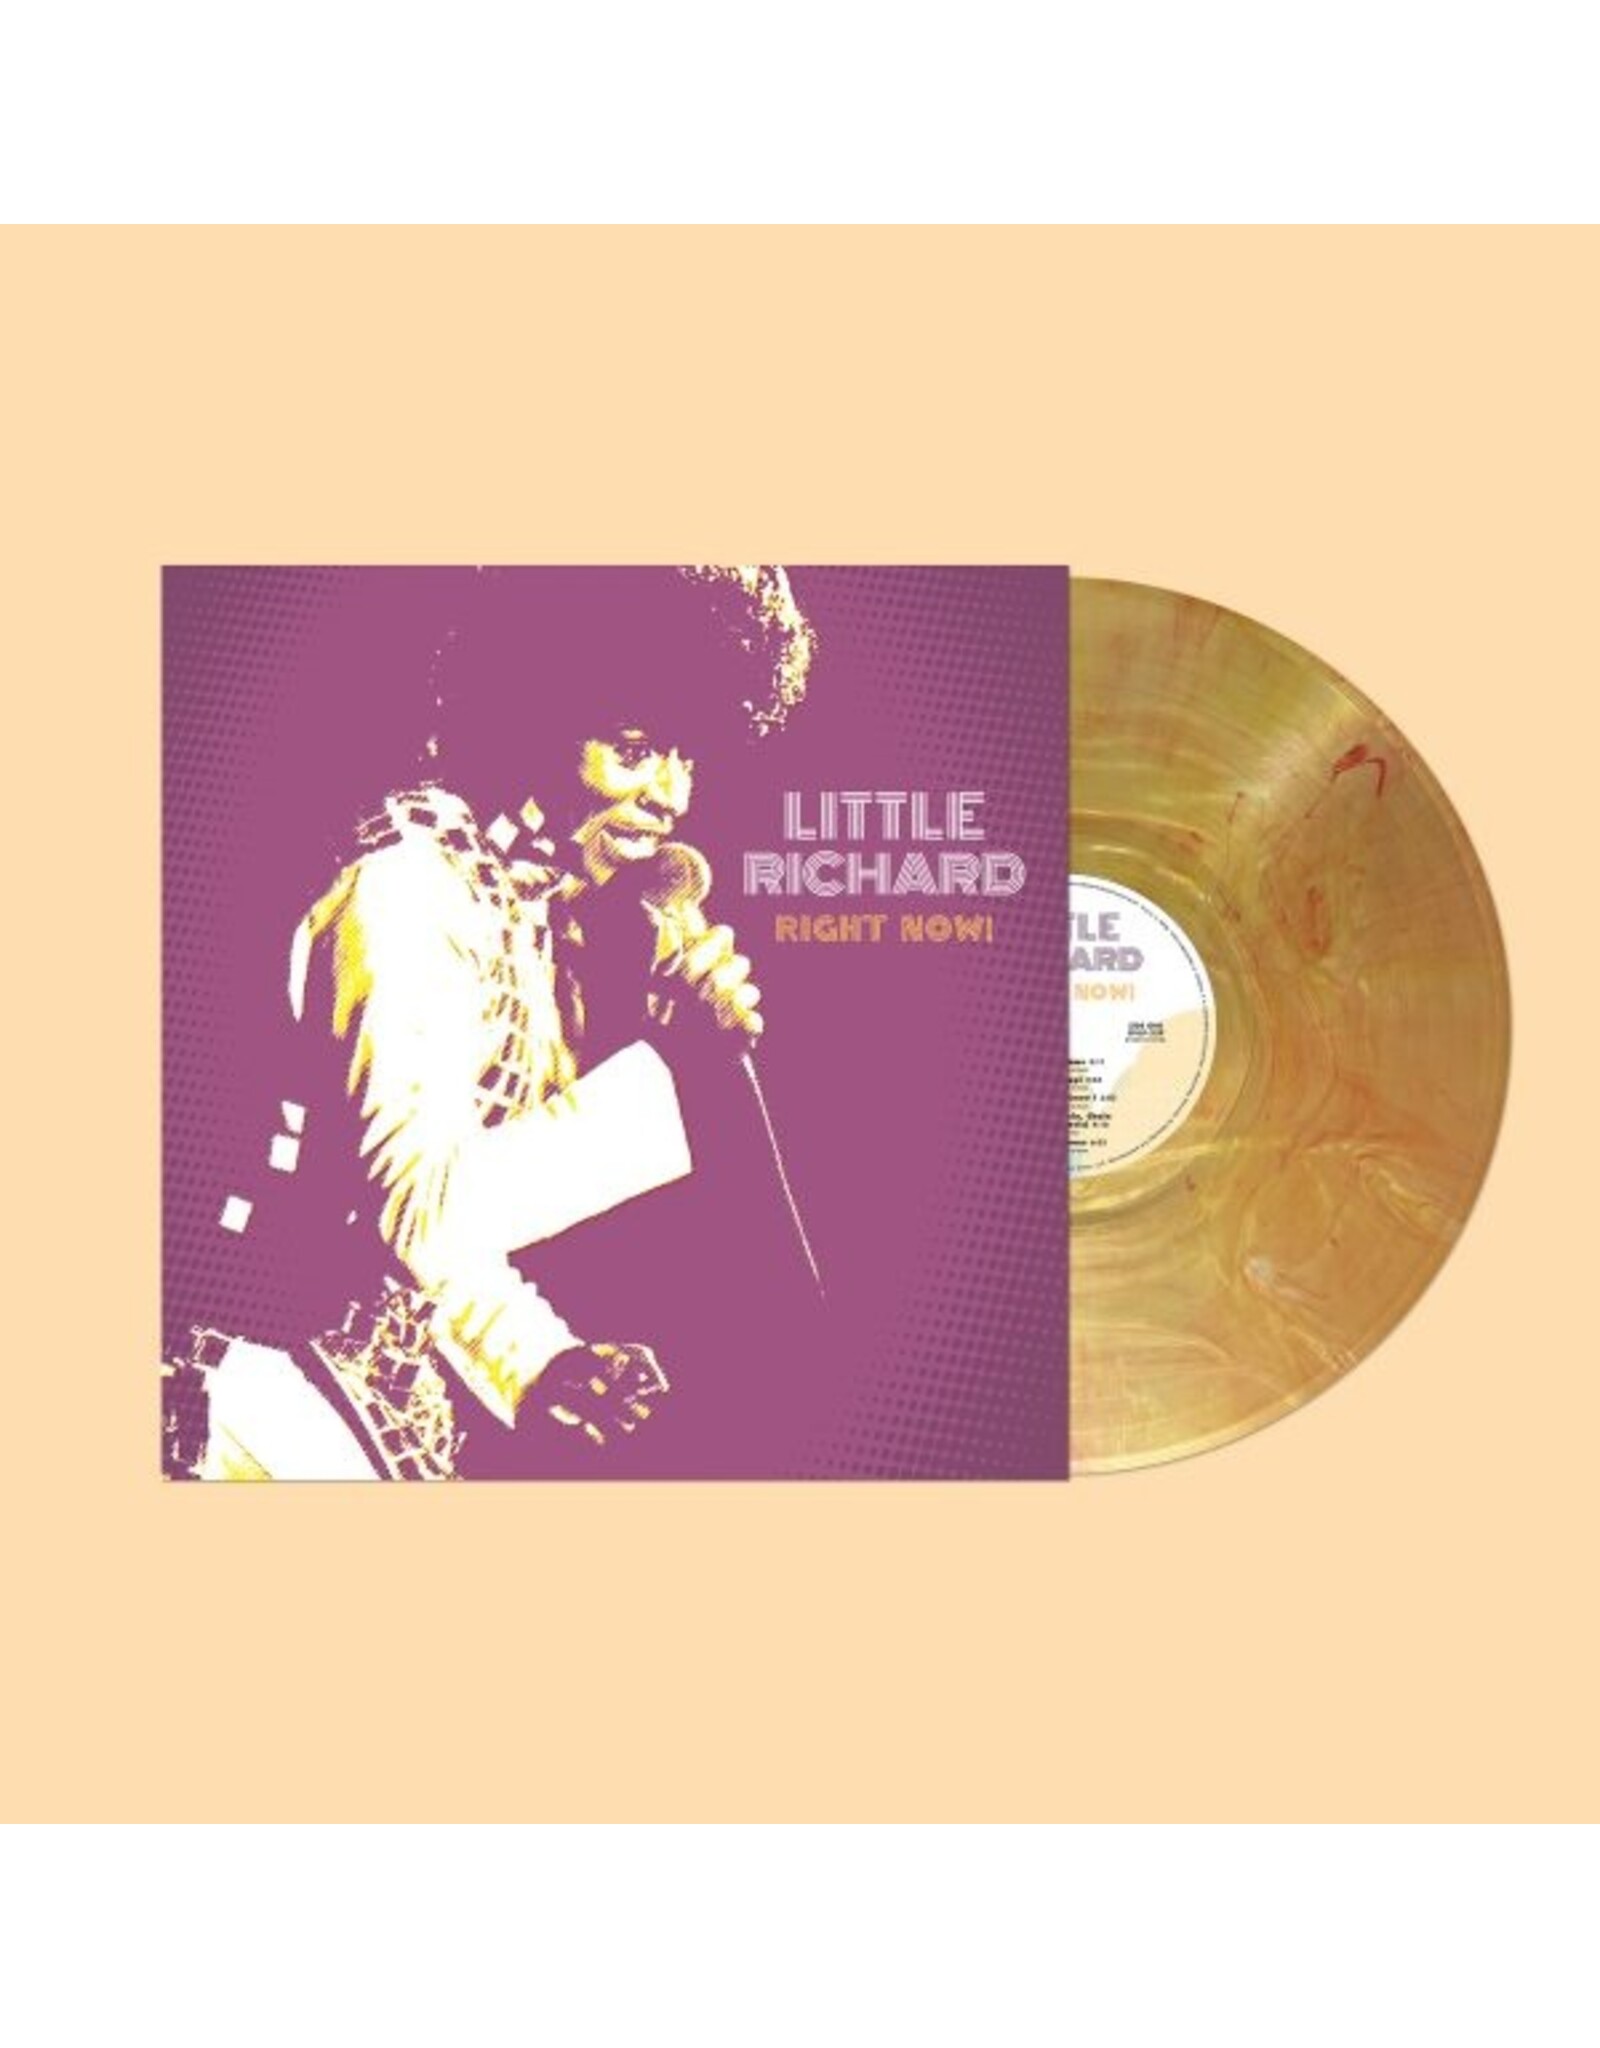 Little Richard - Right Now! (Record Store Day) [Sunflare Vinyl]